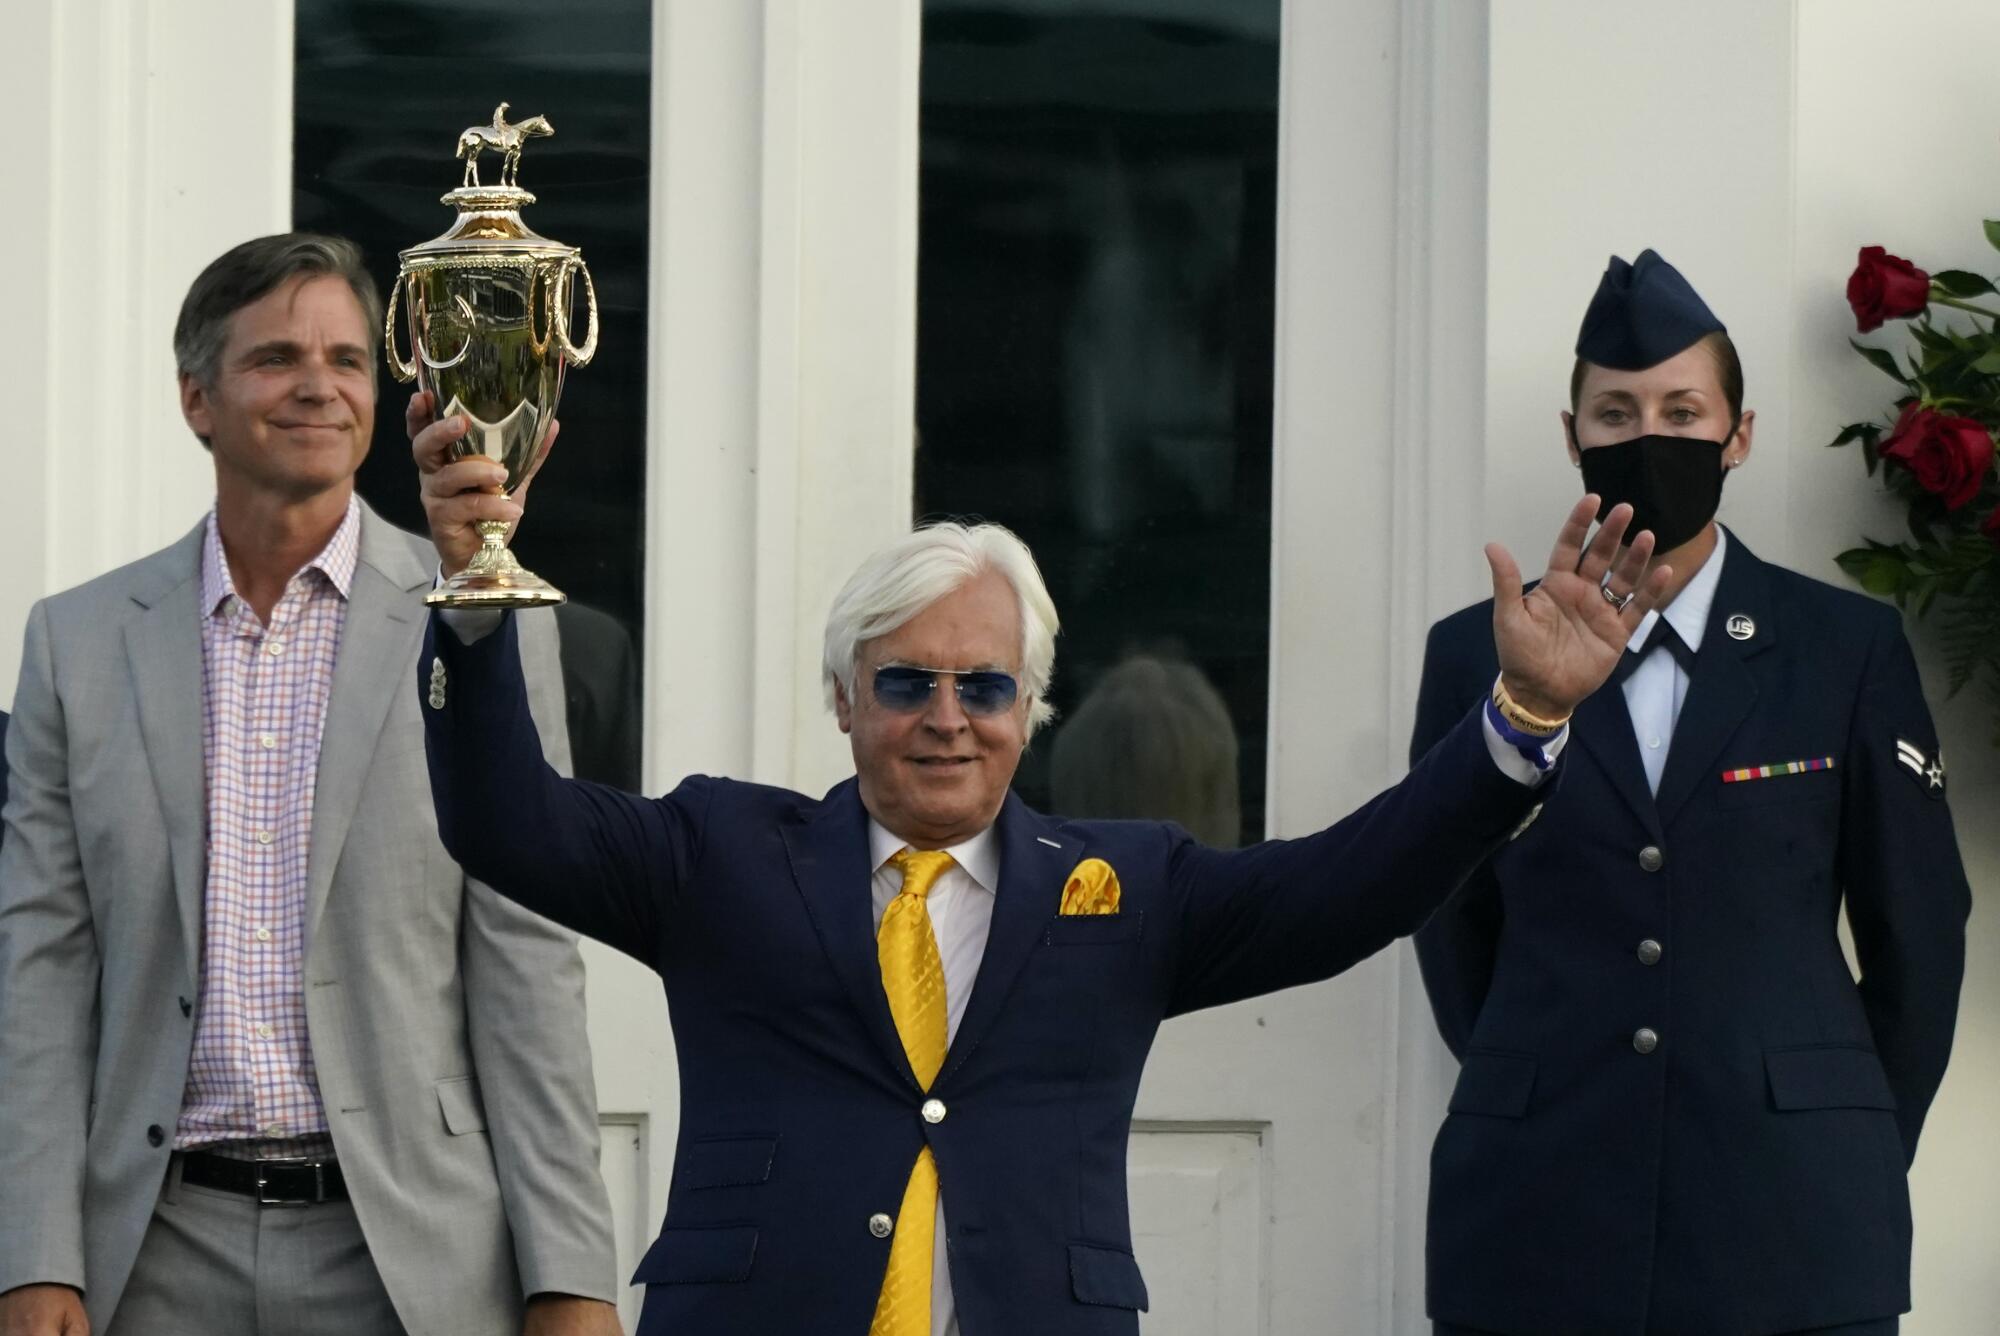 Trainer Bob Baffert celebrates after his horse, Authentic, won the Kentucky Derby in September 2020.